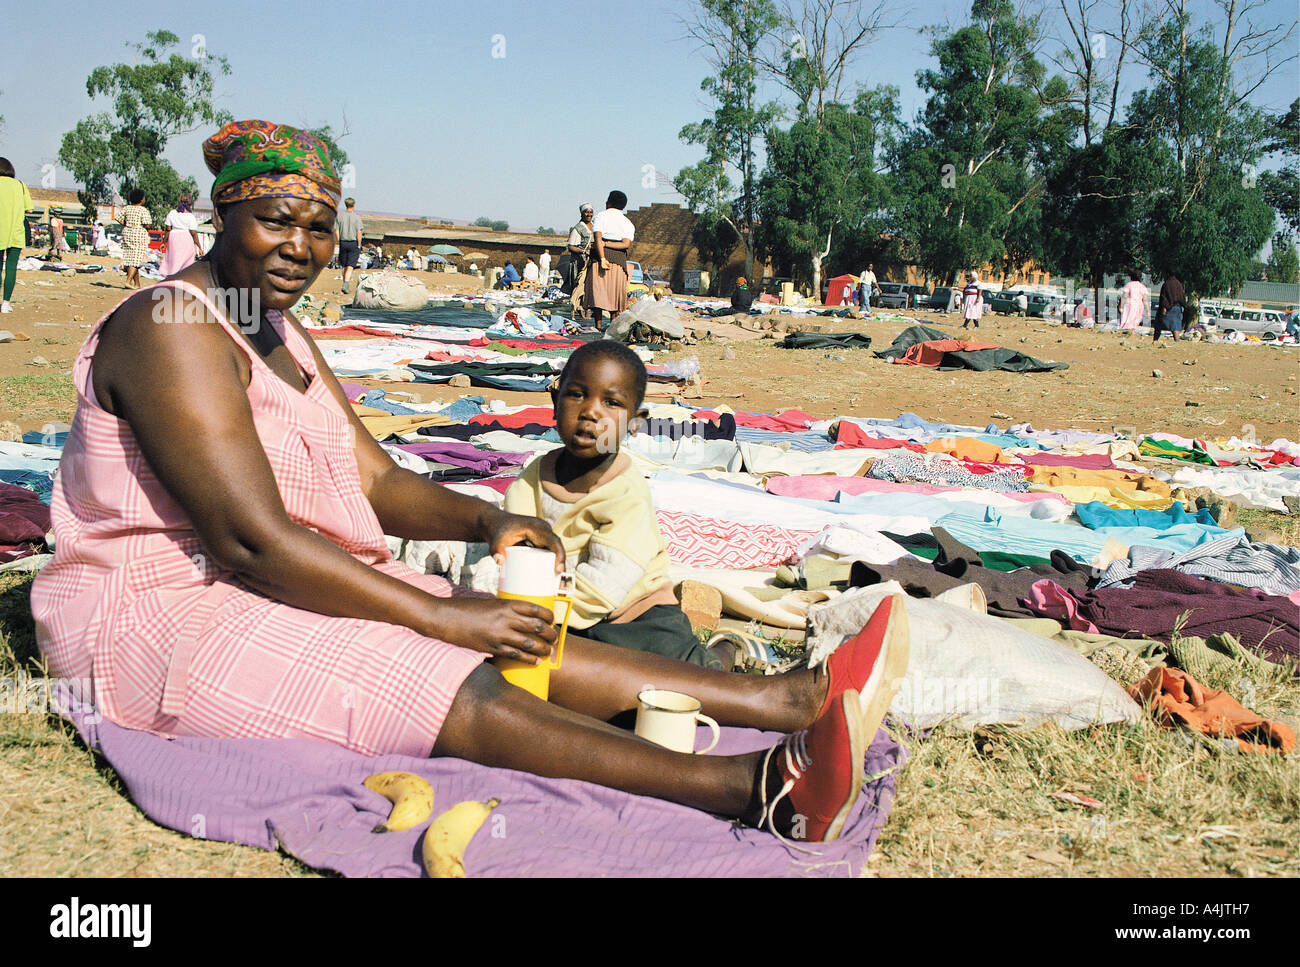 African woman and child alongside the second hand clothes she is selling Soweto township Johannesburg South Africa Stock Photo